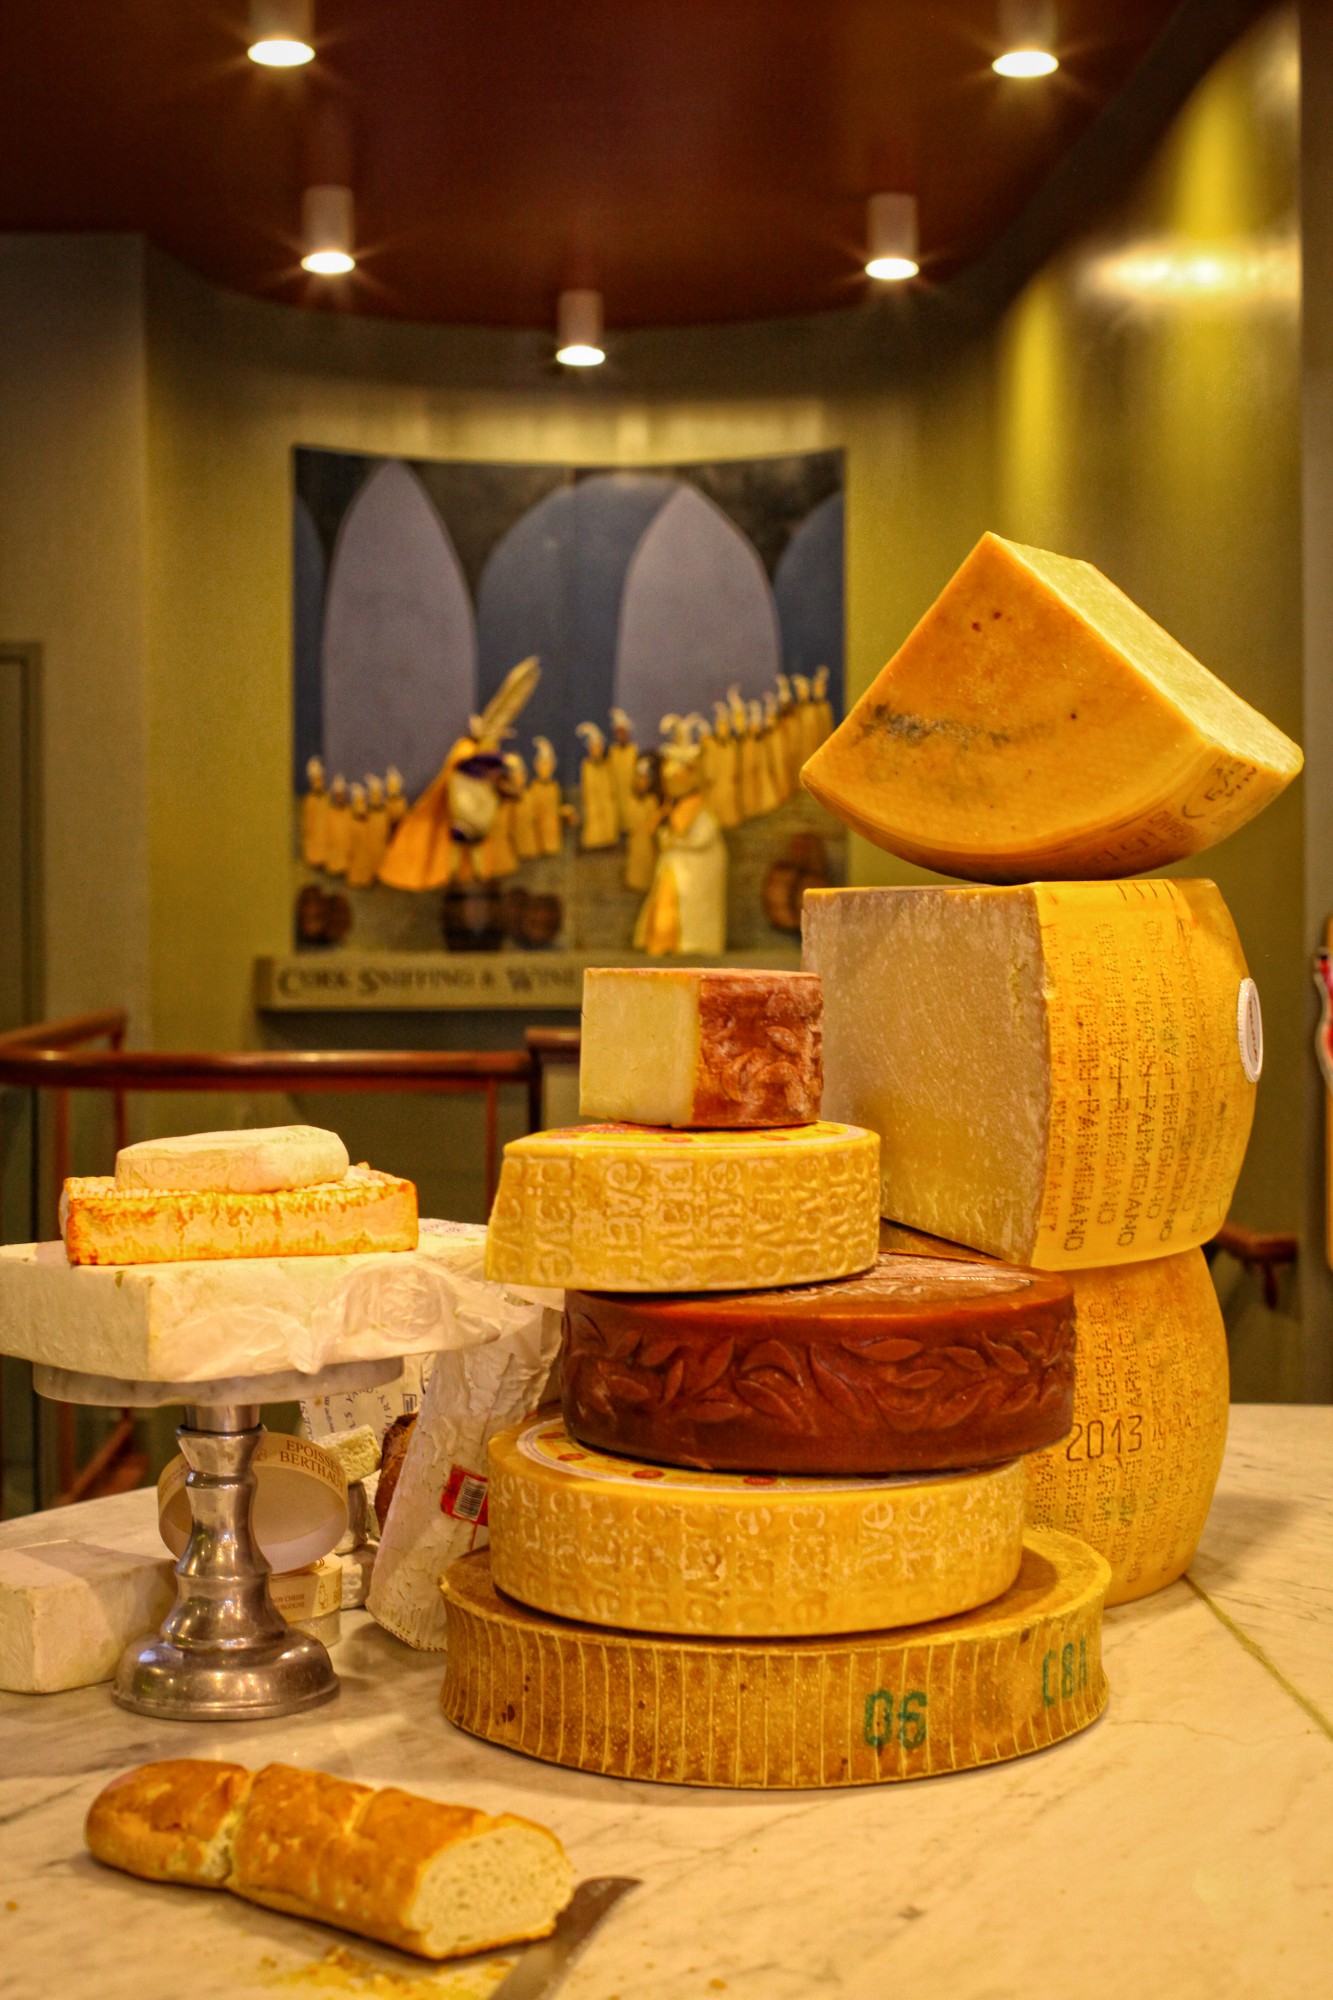 assorted cheeses